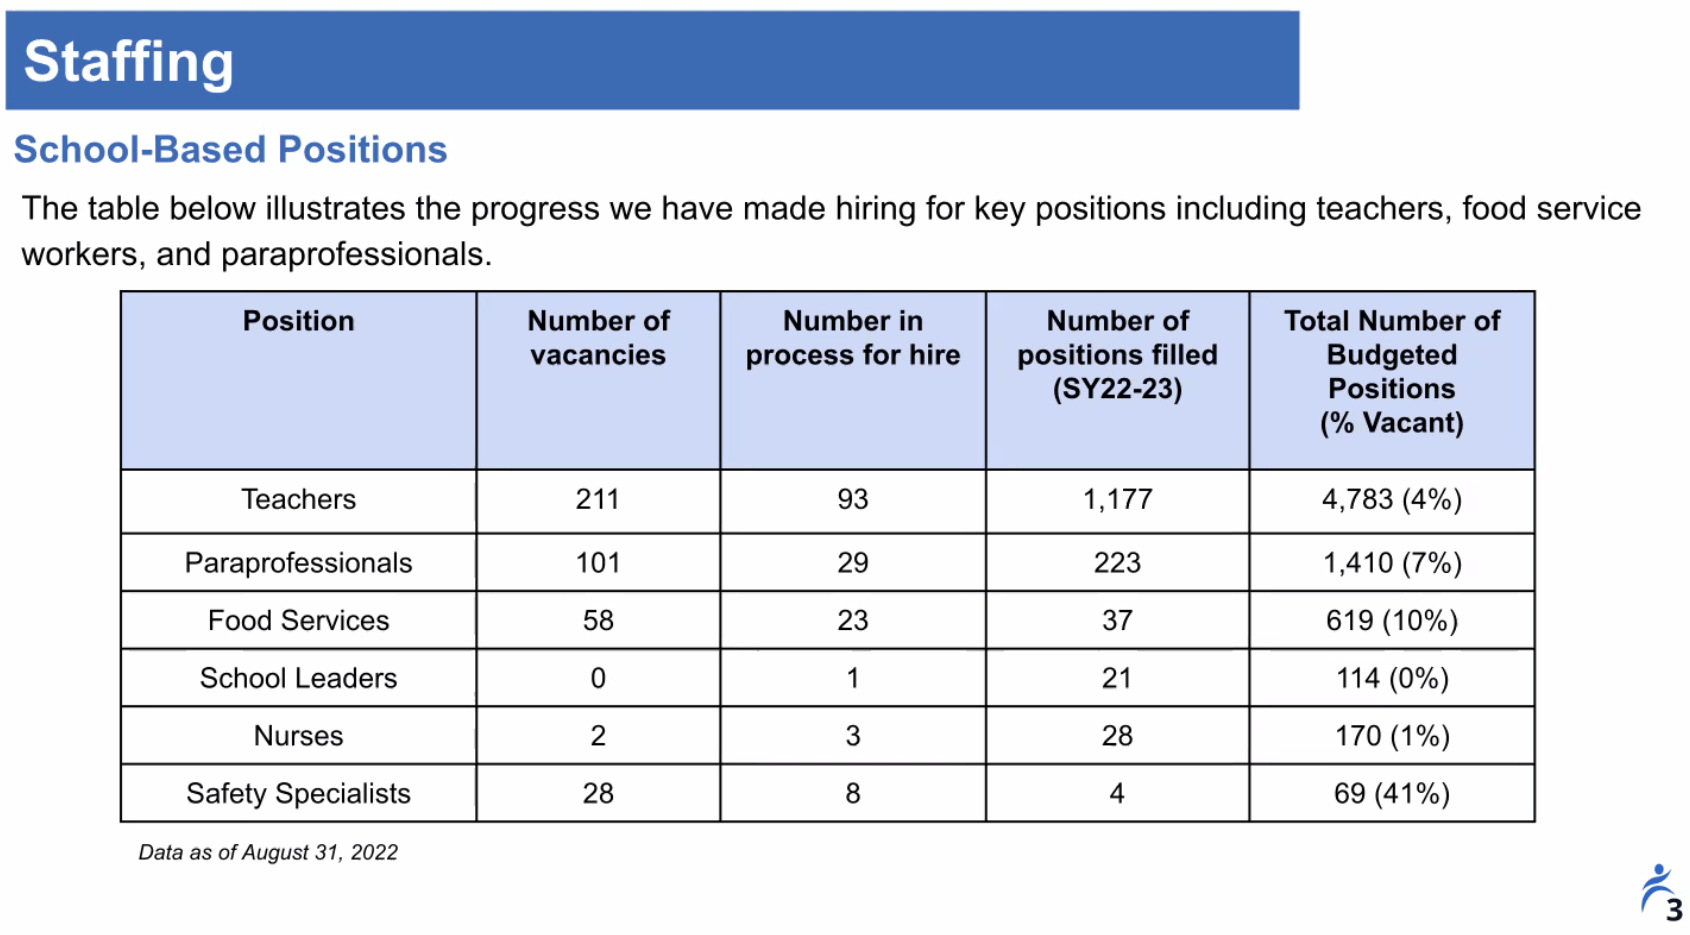 Data on staffing shortages, from the Boston Public Schools reopening presentation from Aug. 31.